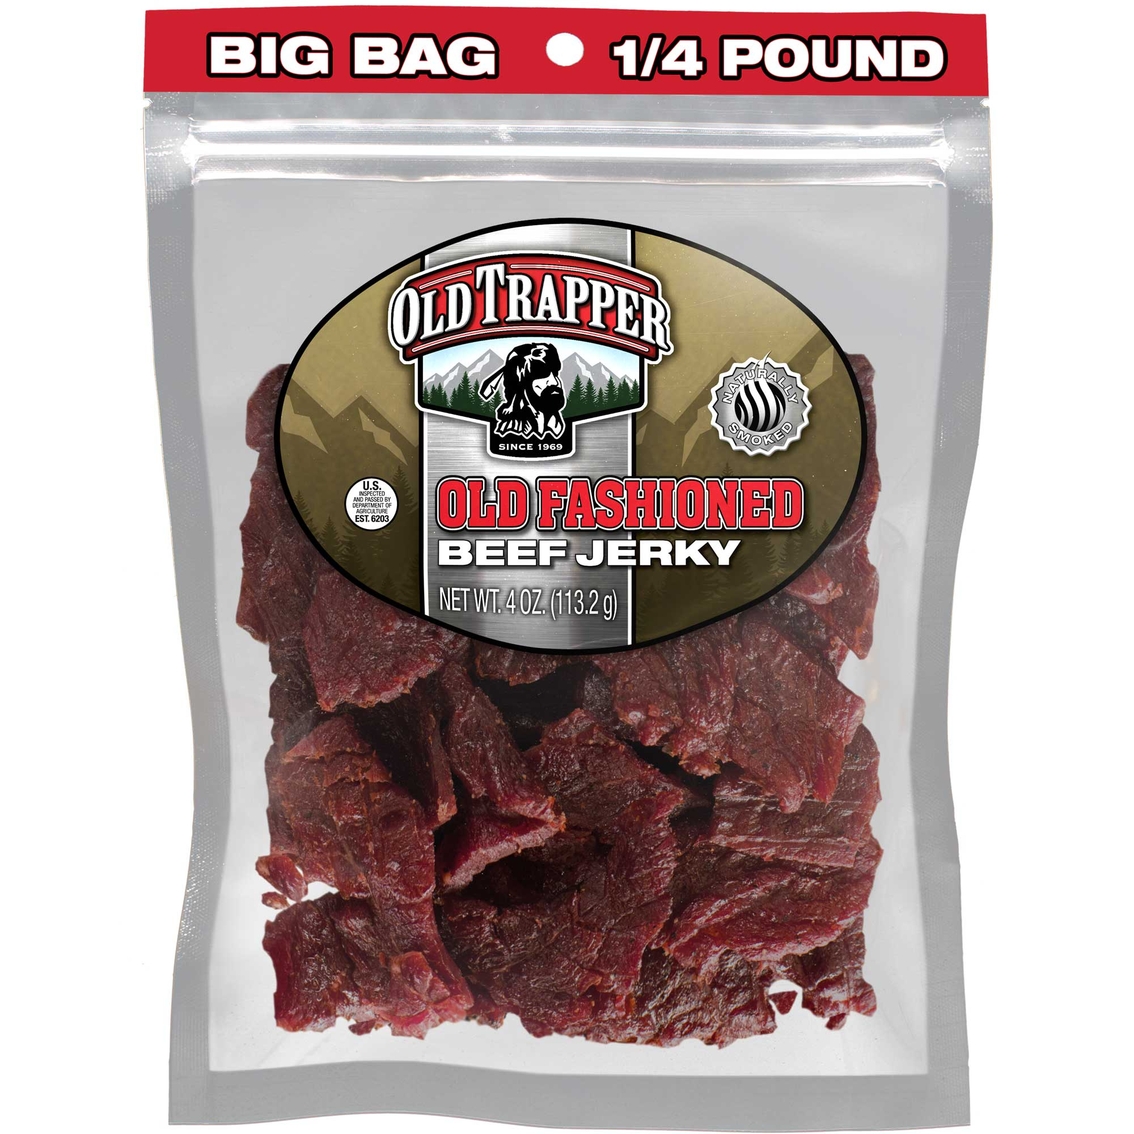 Old Trapper Old Fashioned Beef Jerky 4 oz. - Image 1 of 2